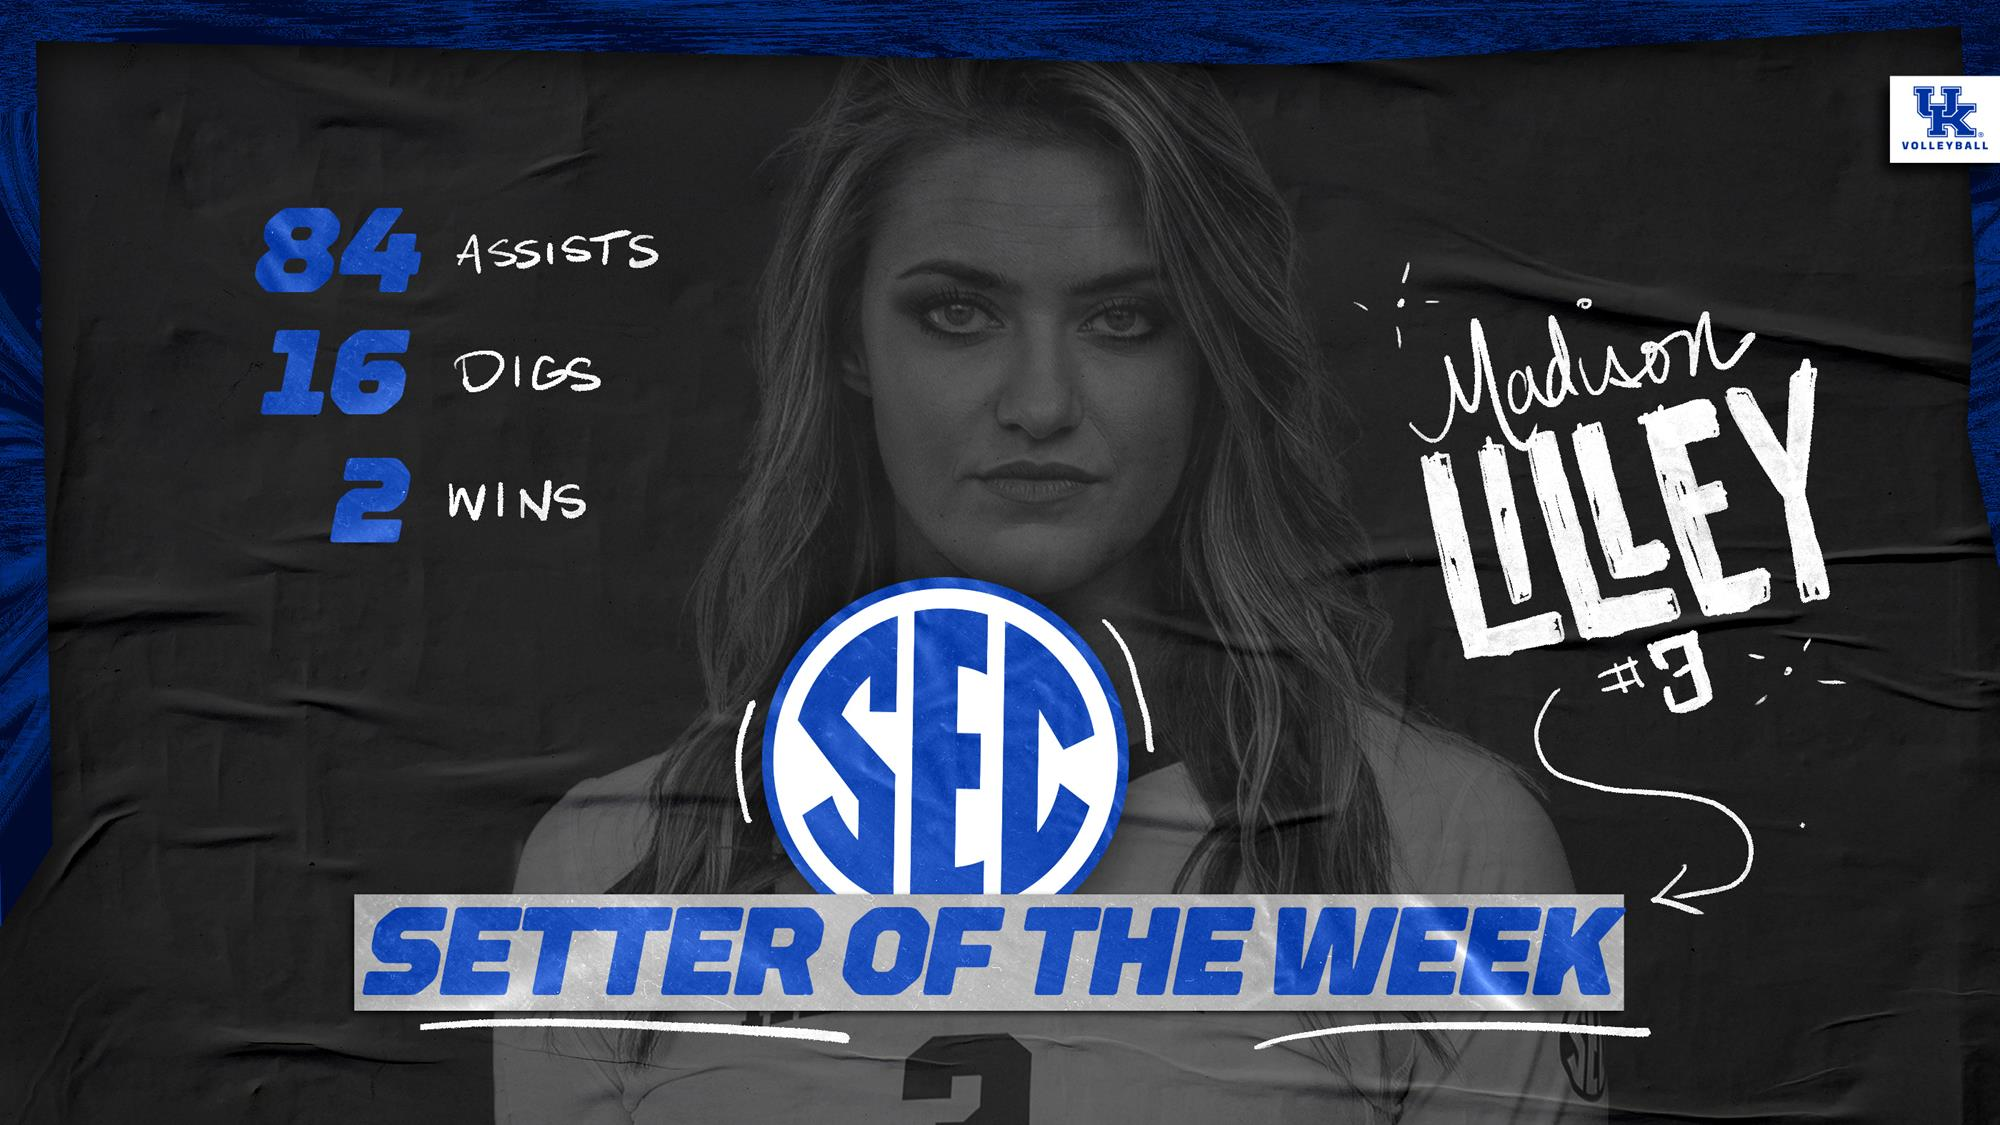 Madison Lilley Wins Third SEC Setter of the Week Award